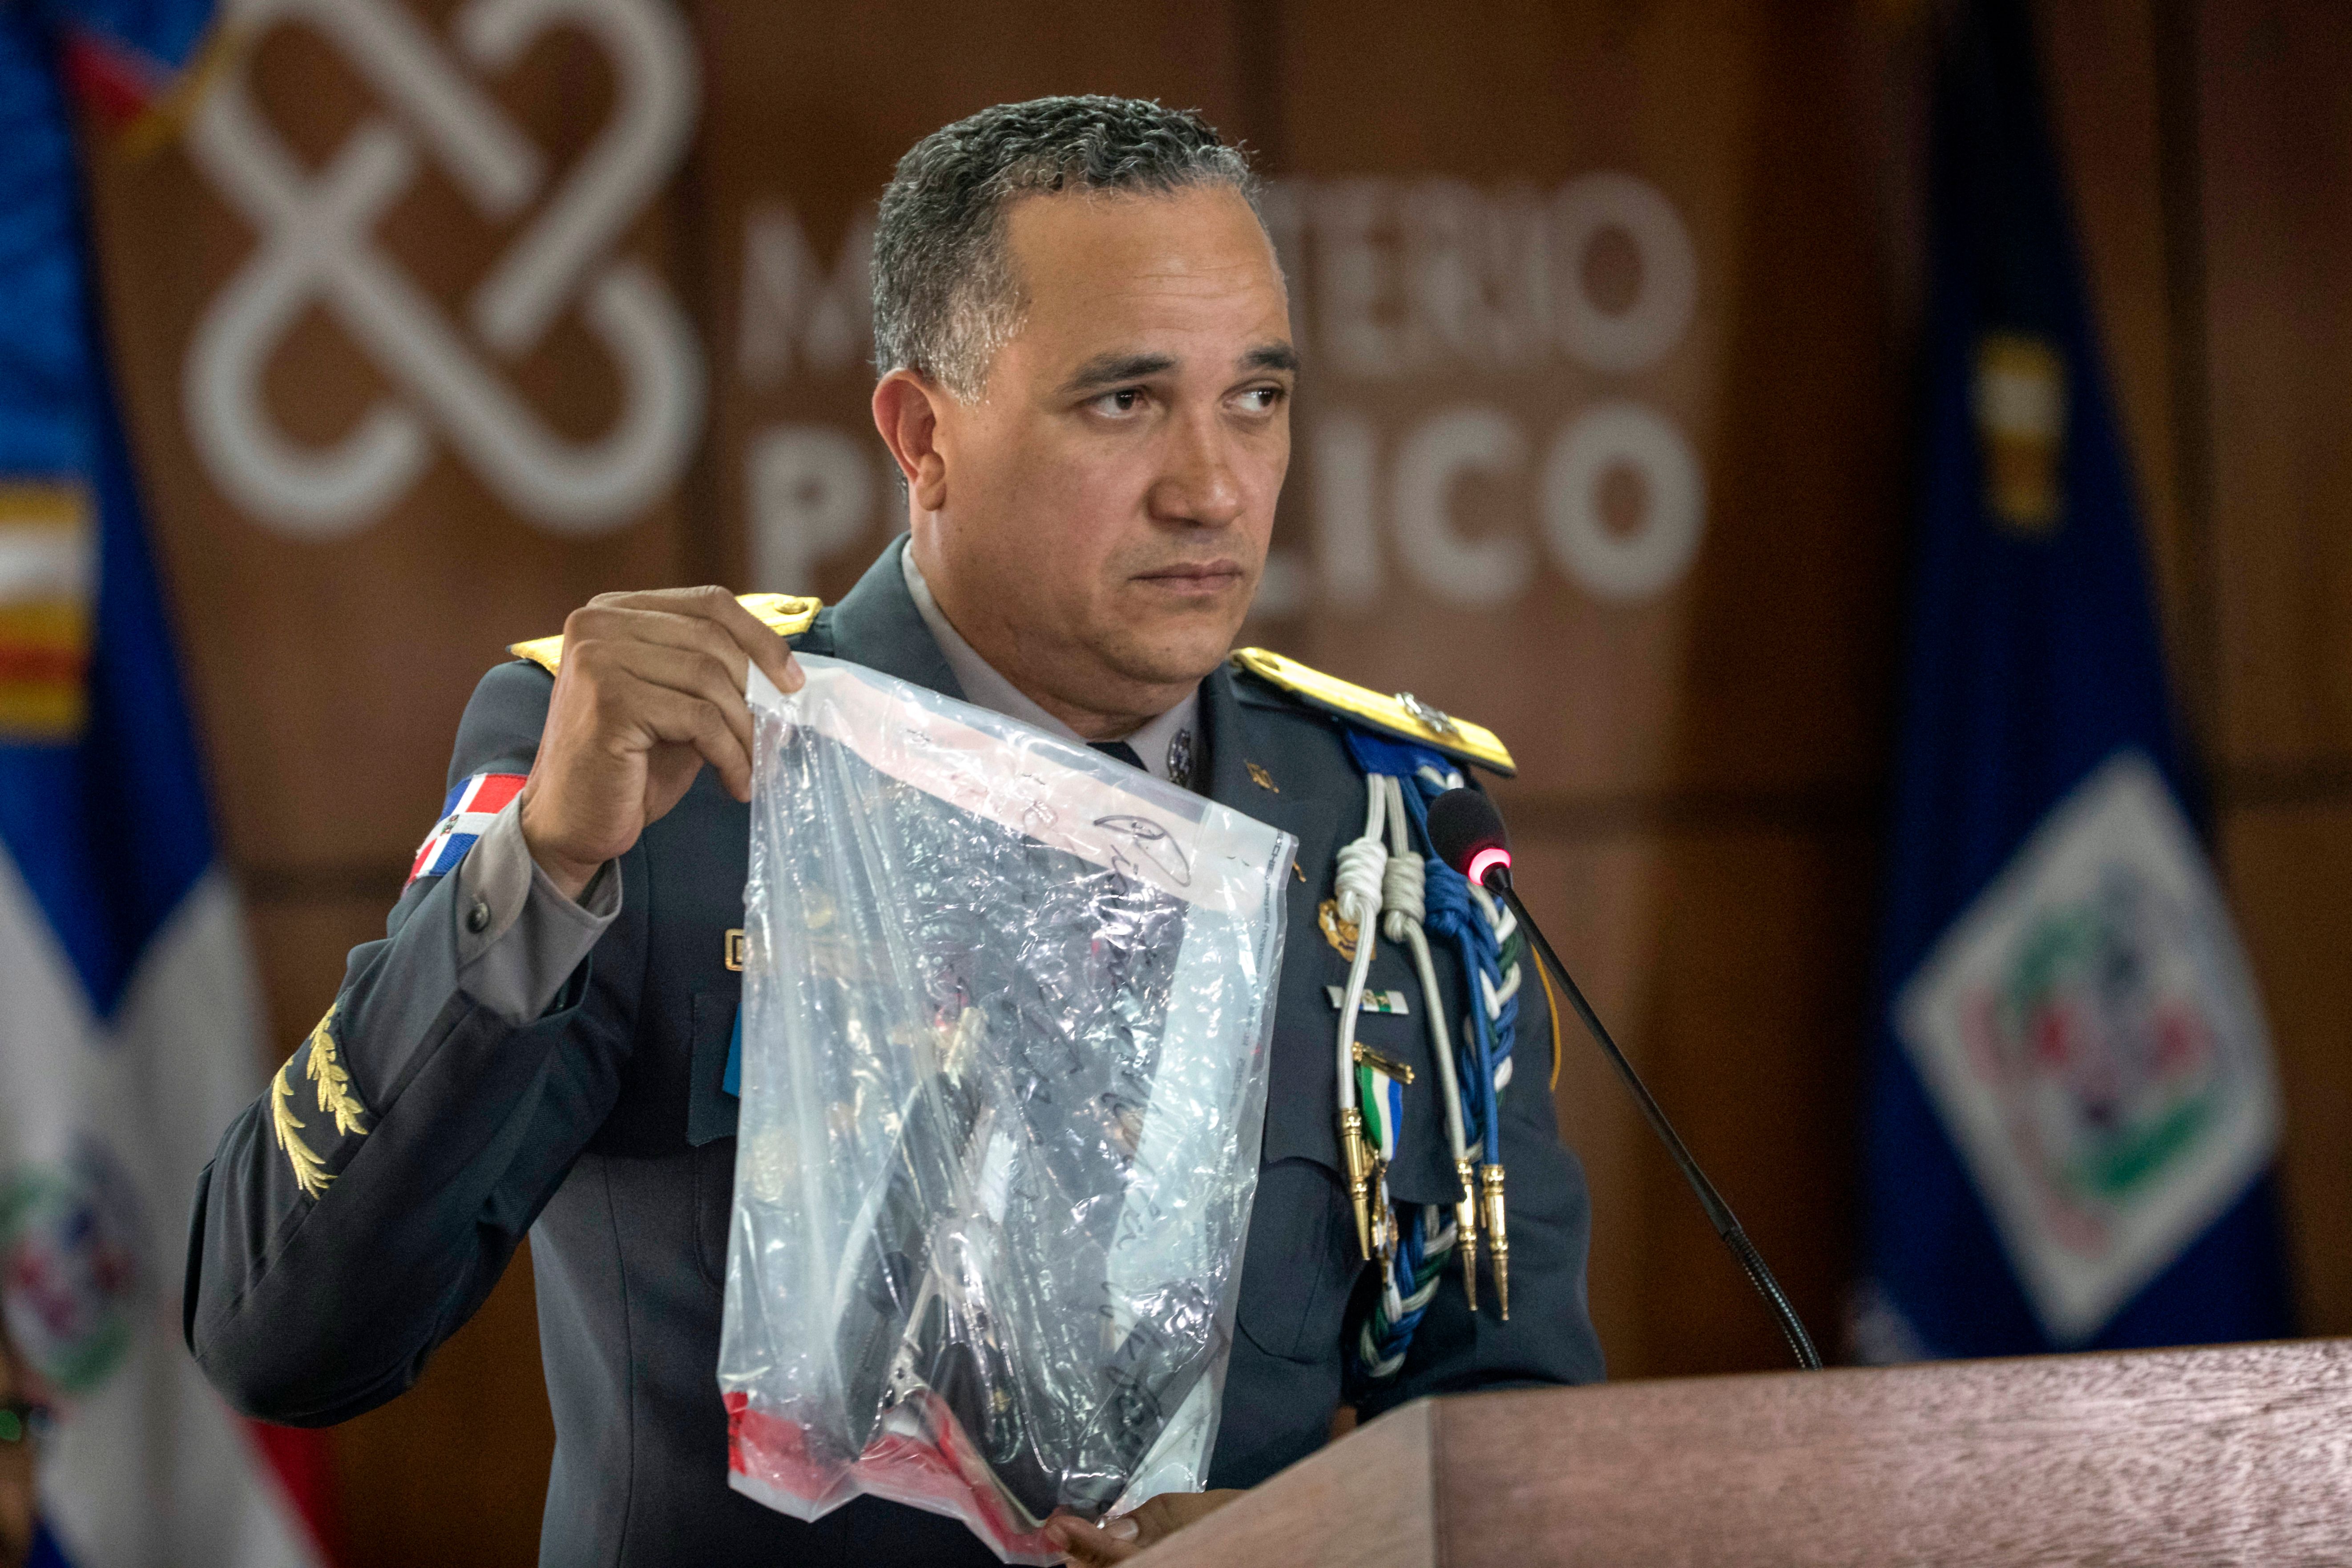 Dominican Republic's National Police Director Ney Aldrin Bautista Almonte delivers a press conference on the attack against former baseball player David Ortiz, in Santo Domingo, on June 12, 2019. (Photo credit ERIKA SANTELICES/AFP/Getty Images)